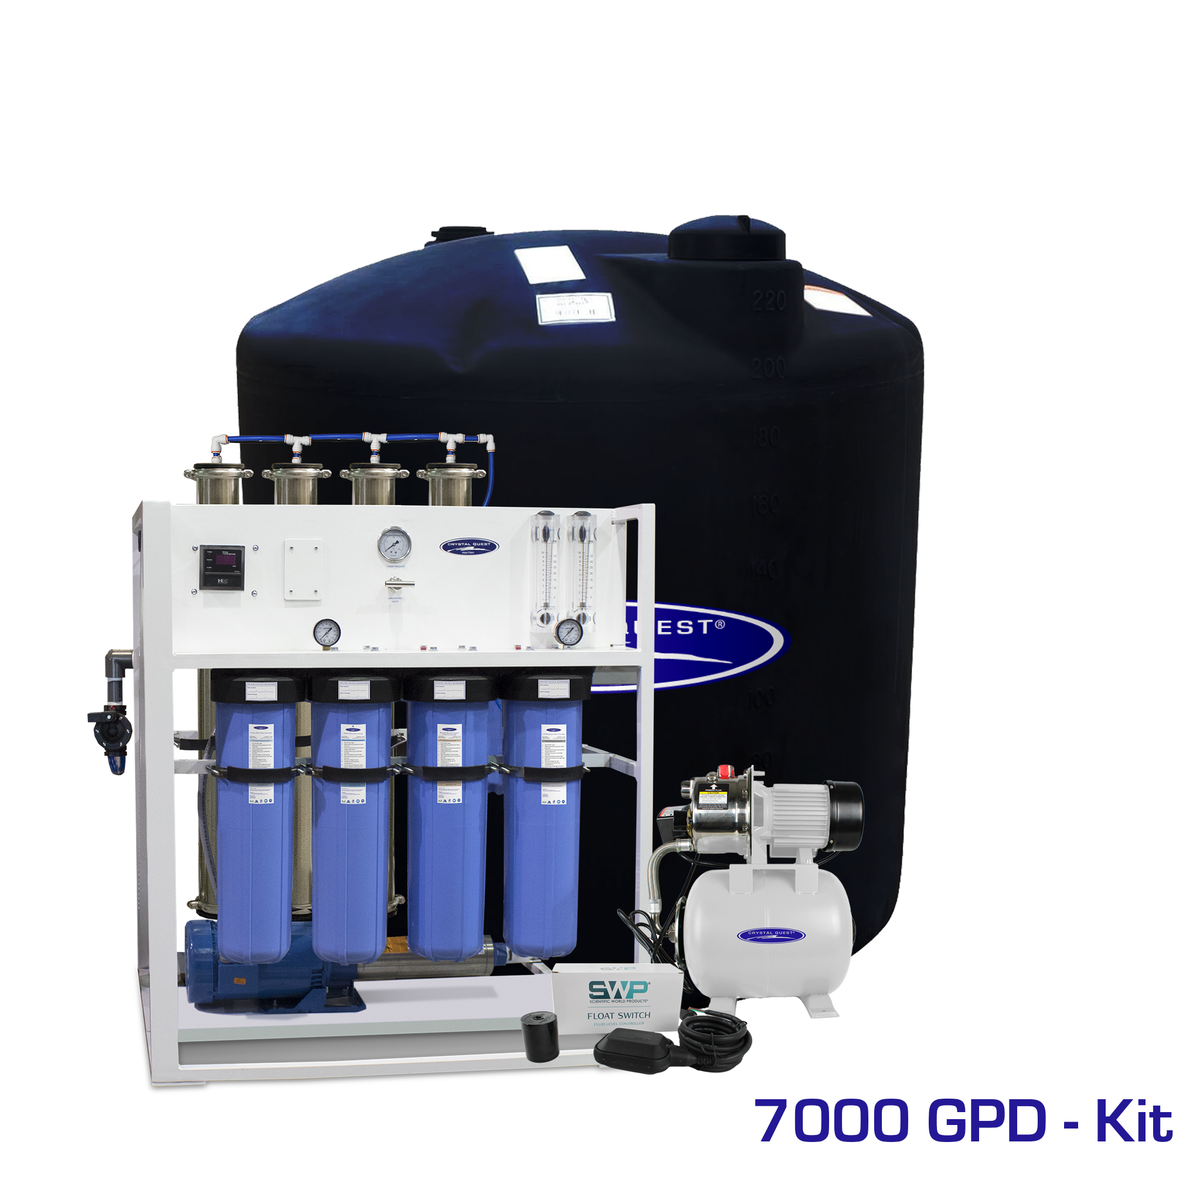 7,000 GPD / Add Storage Tank Kit (220 Gal) Commercial Mid-Flow Reverse Osmosis System (500-7000 GPD) - Commercial - Crystal Quest